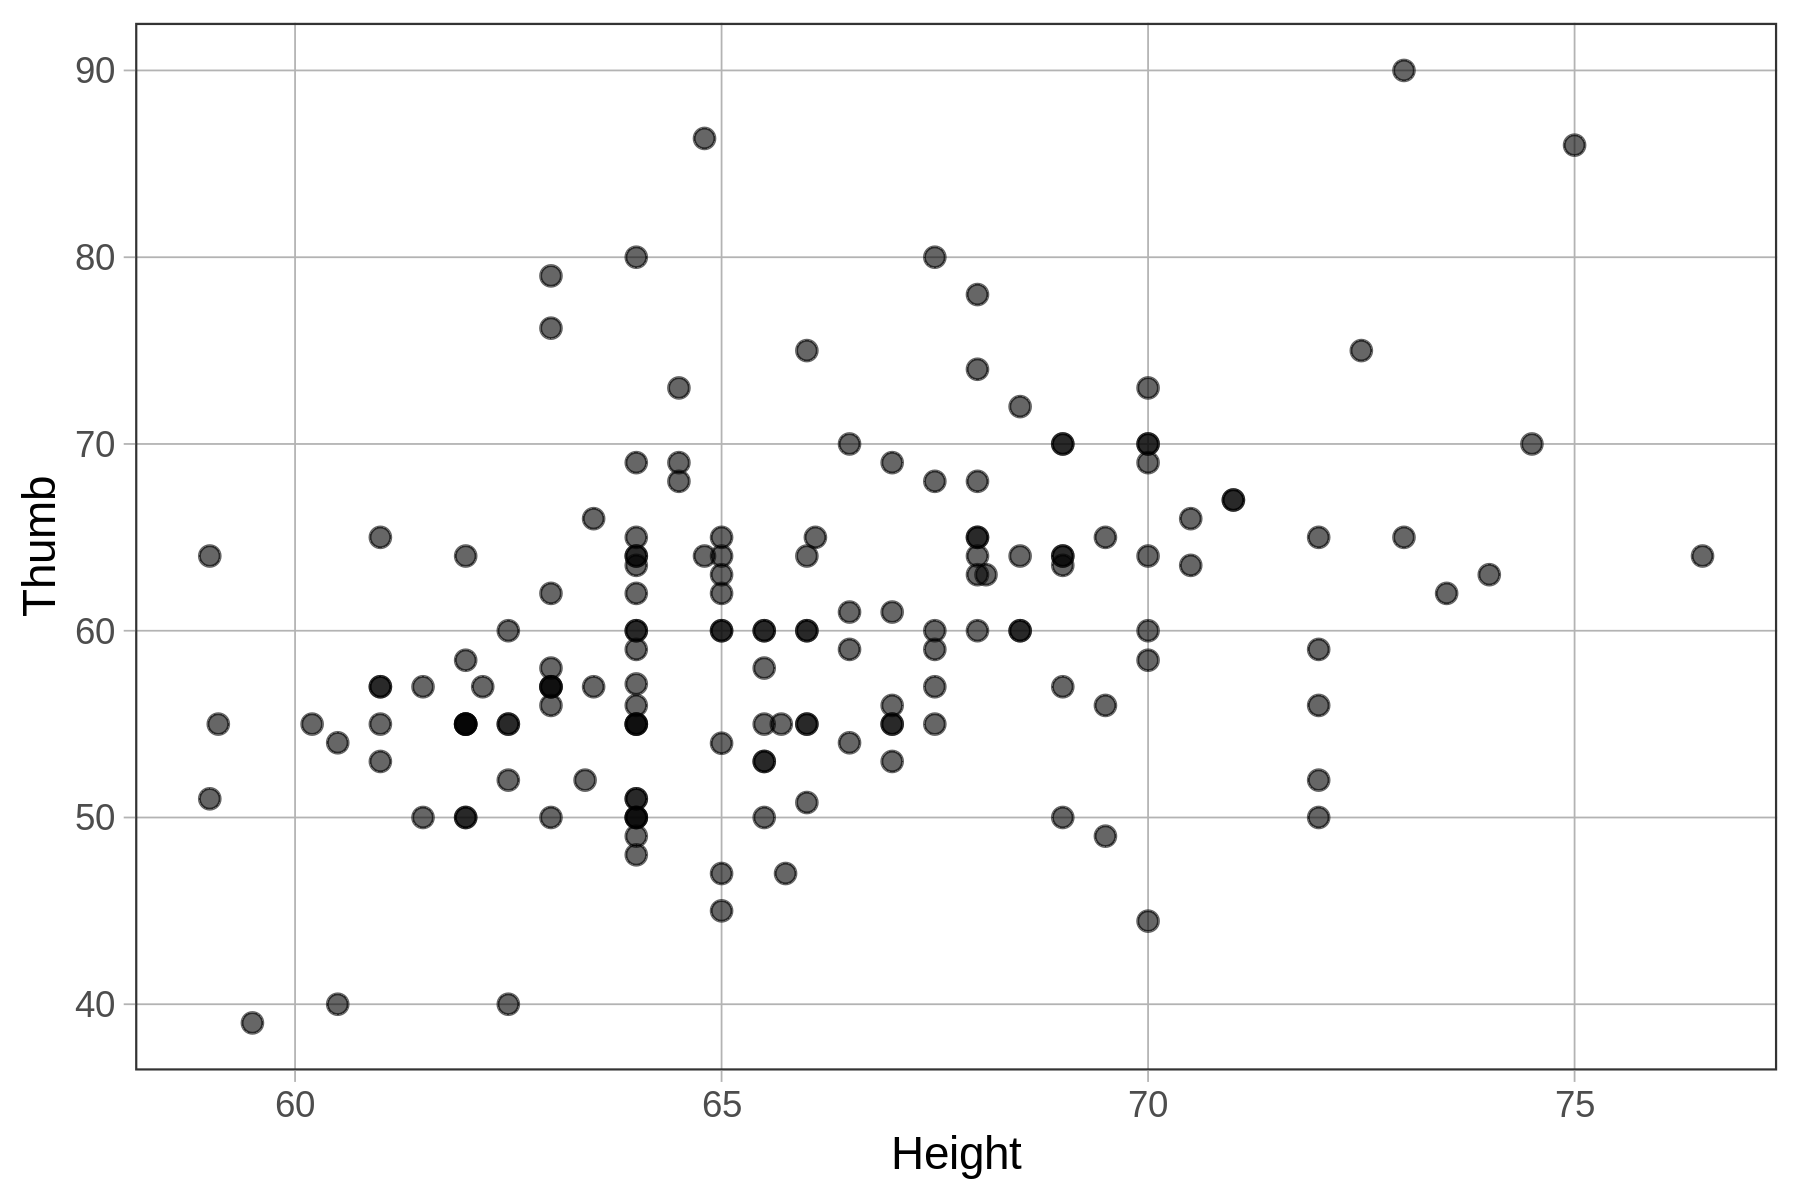 A scatterplot of Thumb by Height.